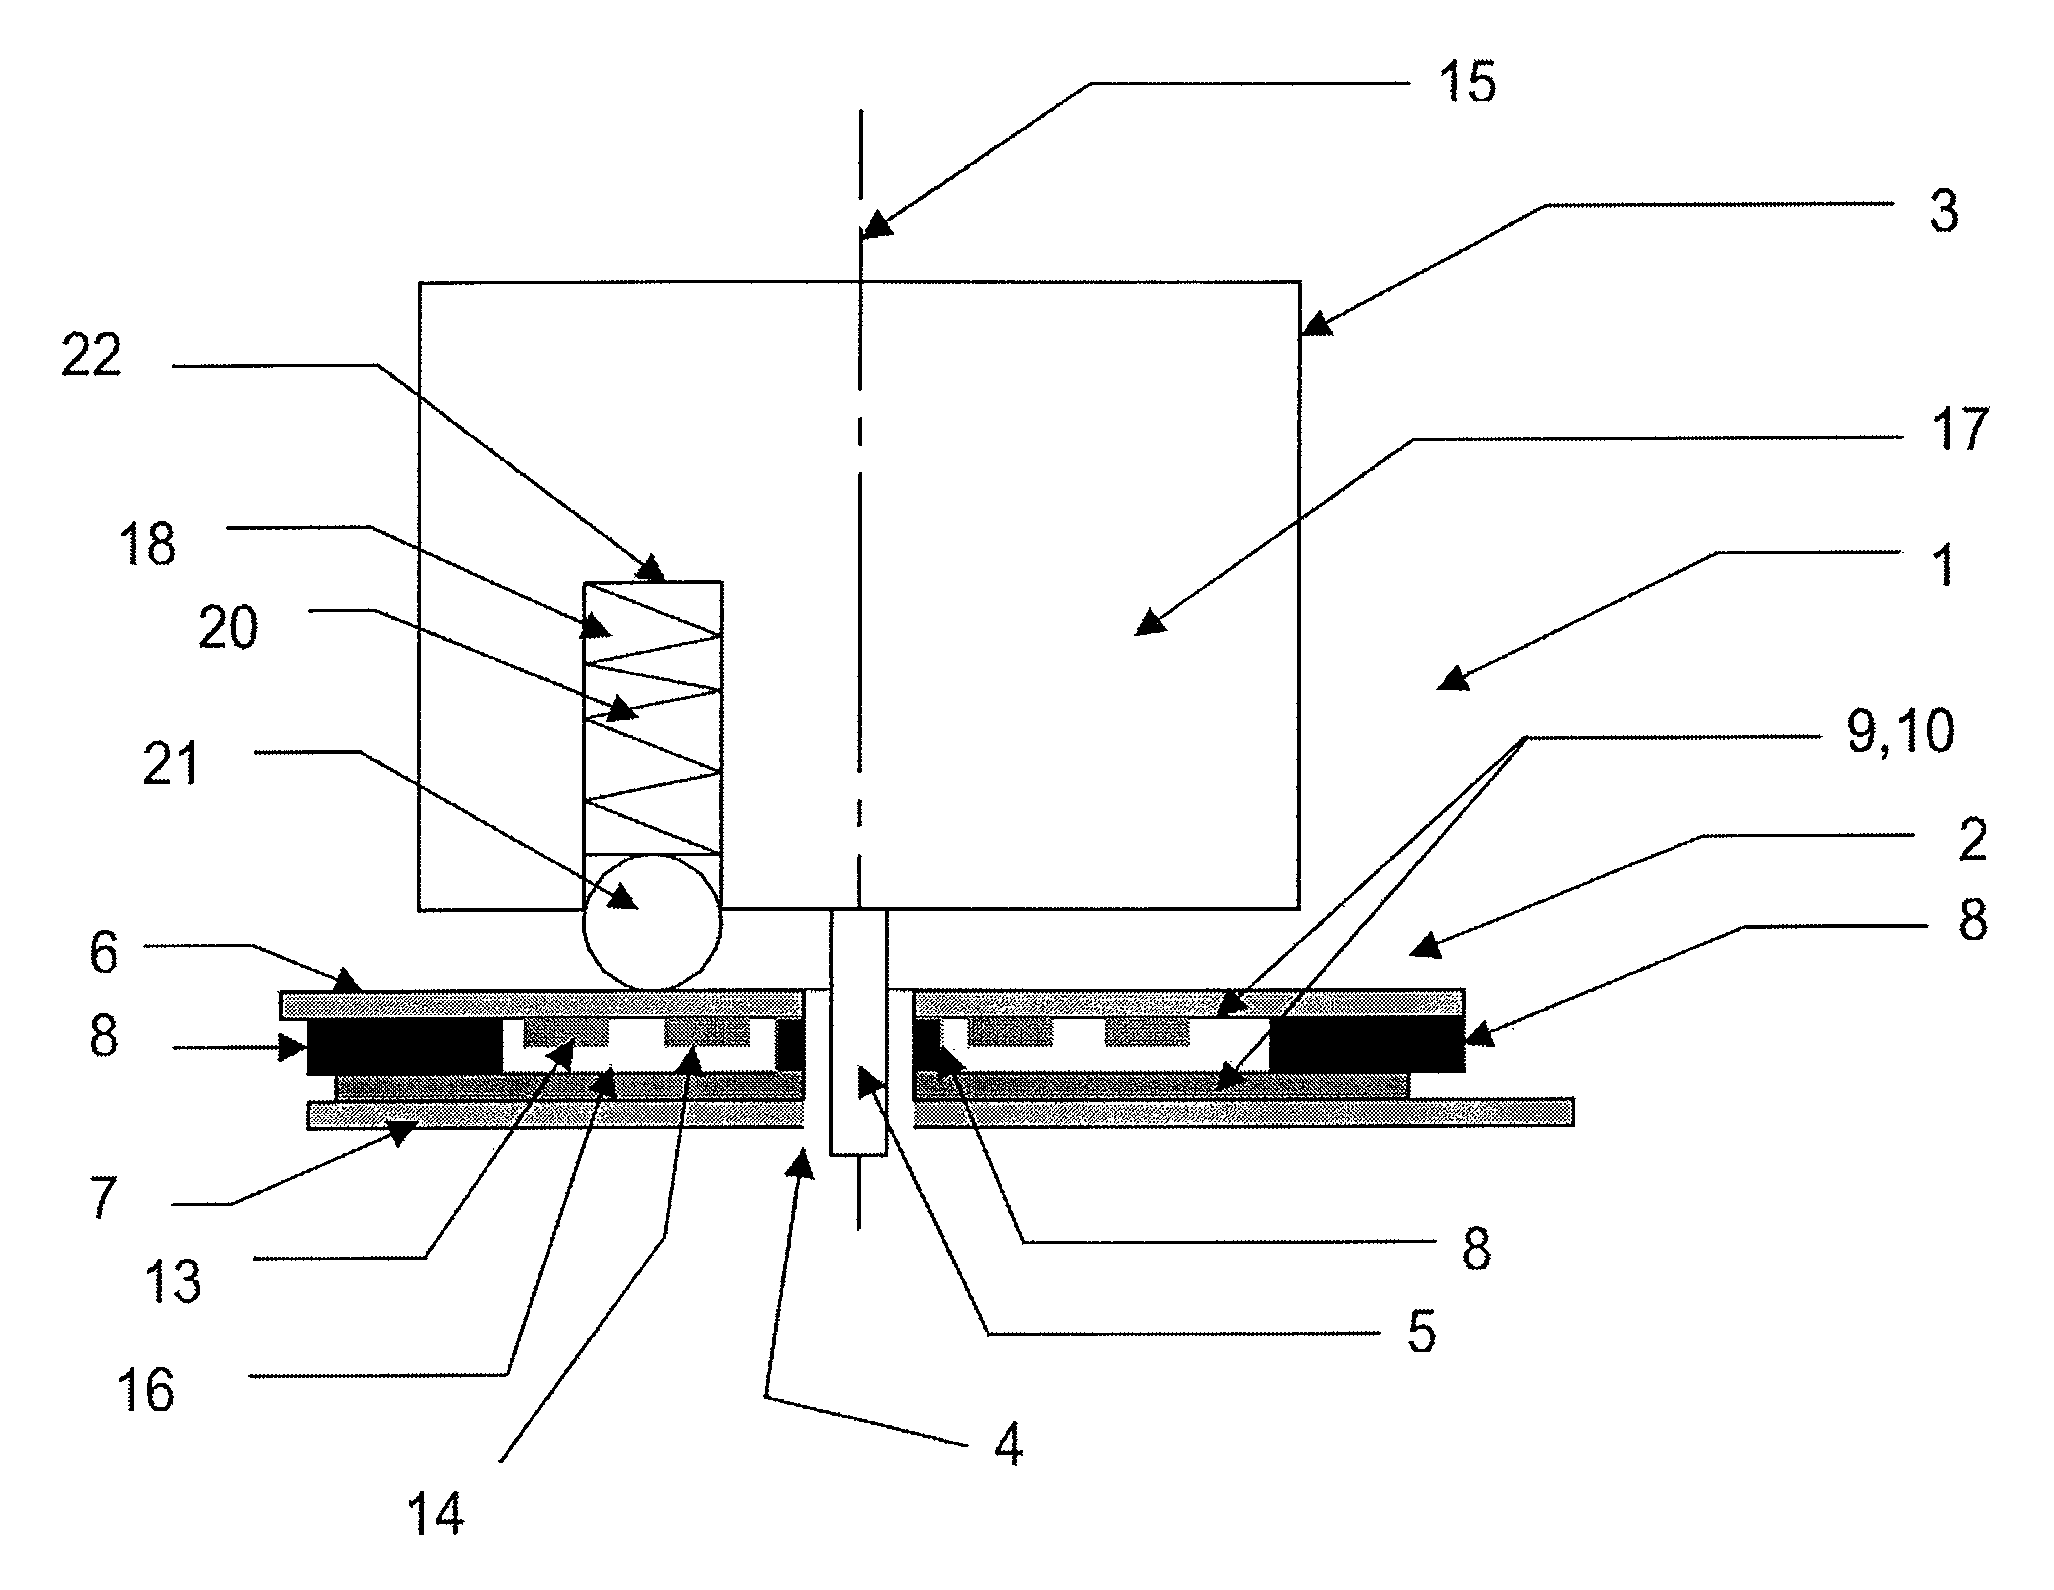 Rotary electrical switching device